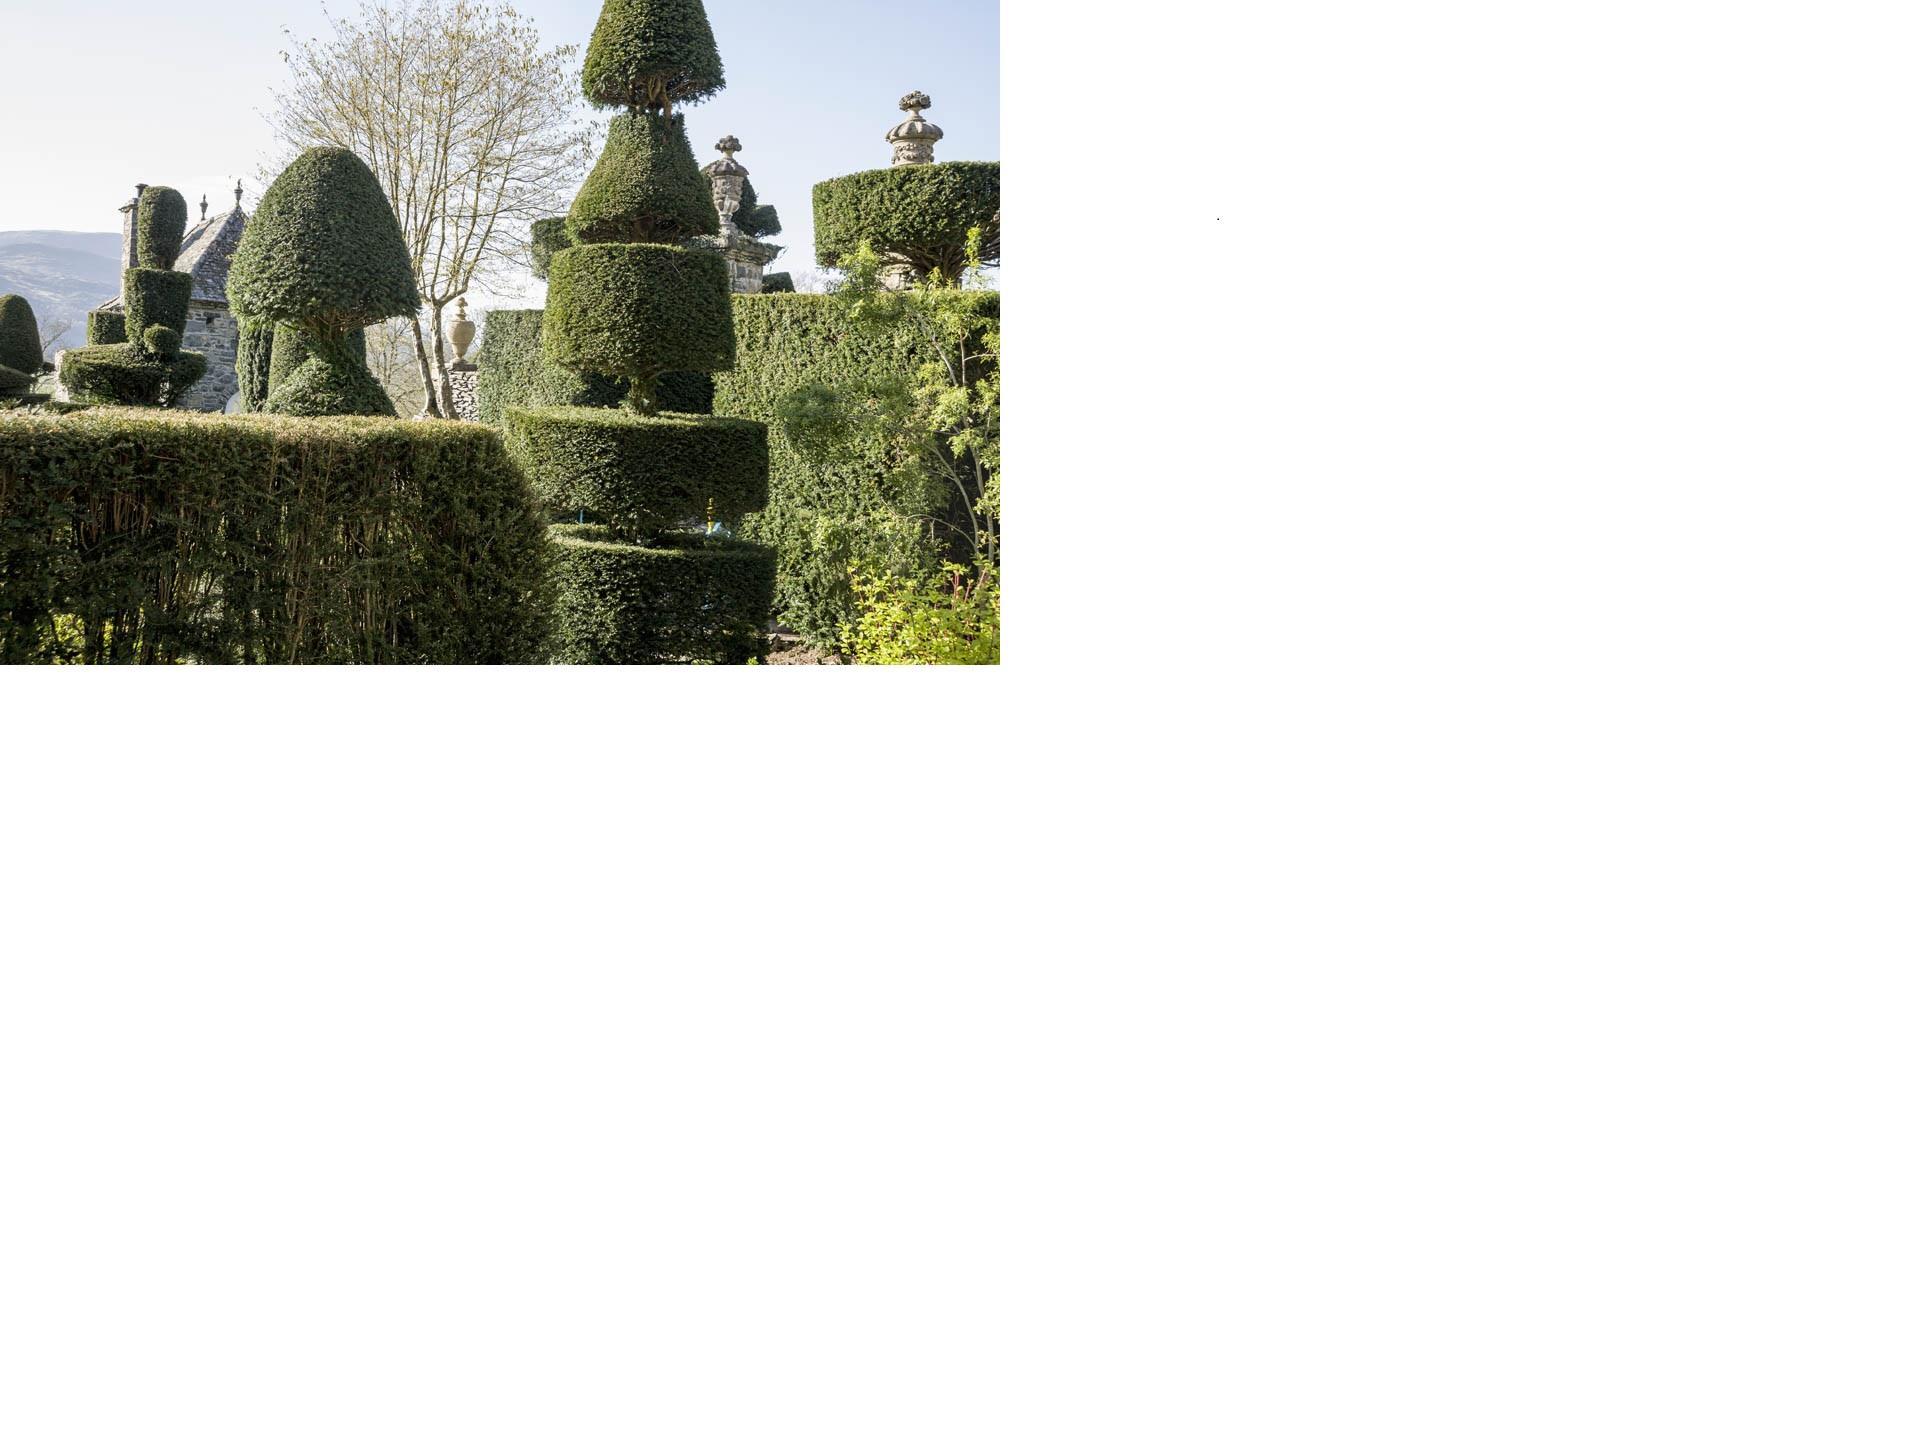 Topiary at the Gardens 